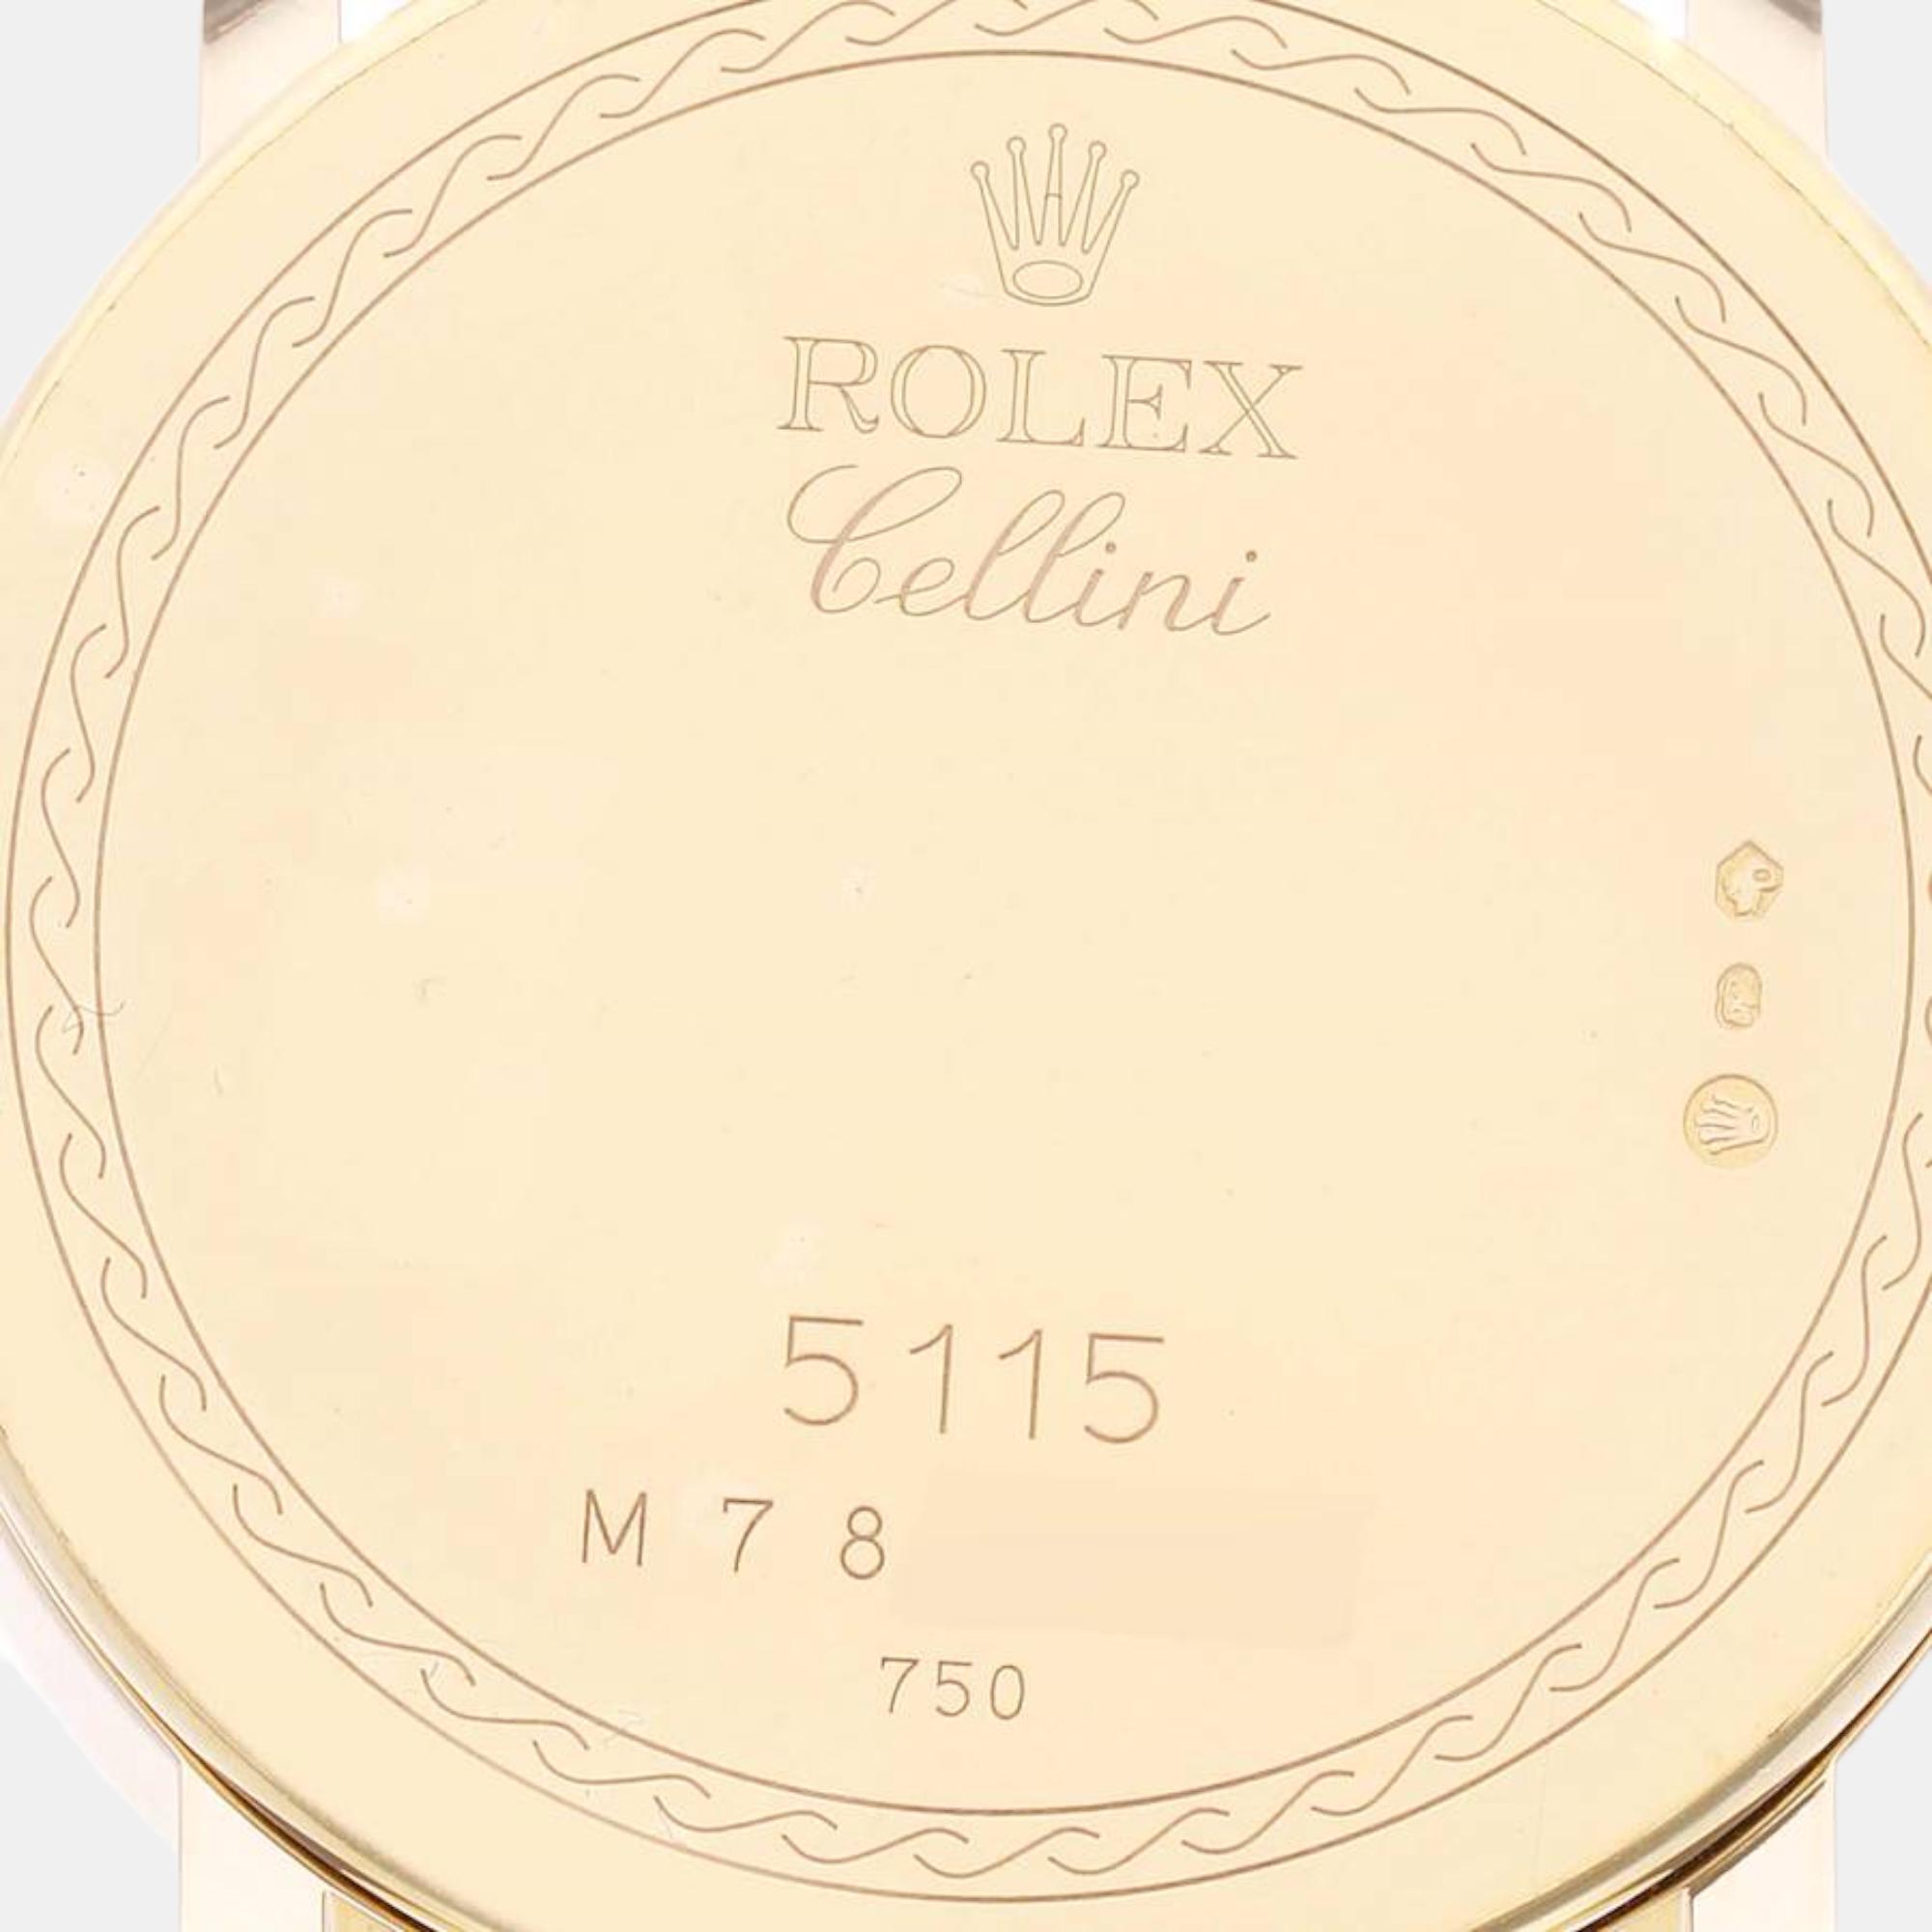 Rolex Cellini Classic Yellow Gold Silver Dial Men's Watch 5115 32 Mm